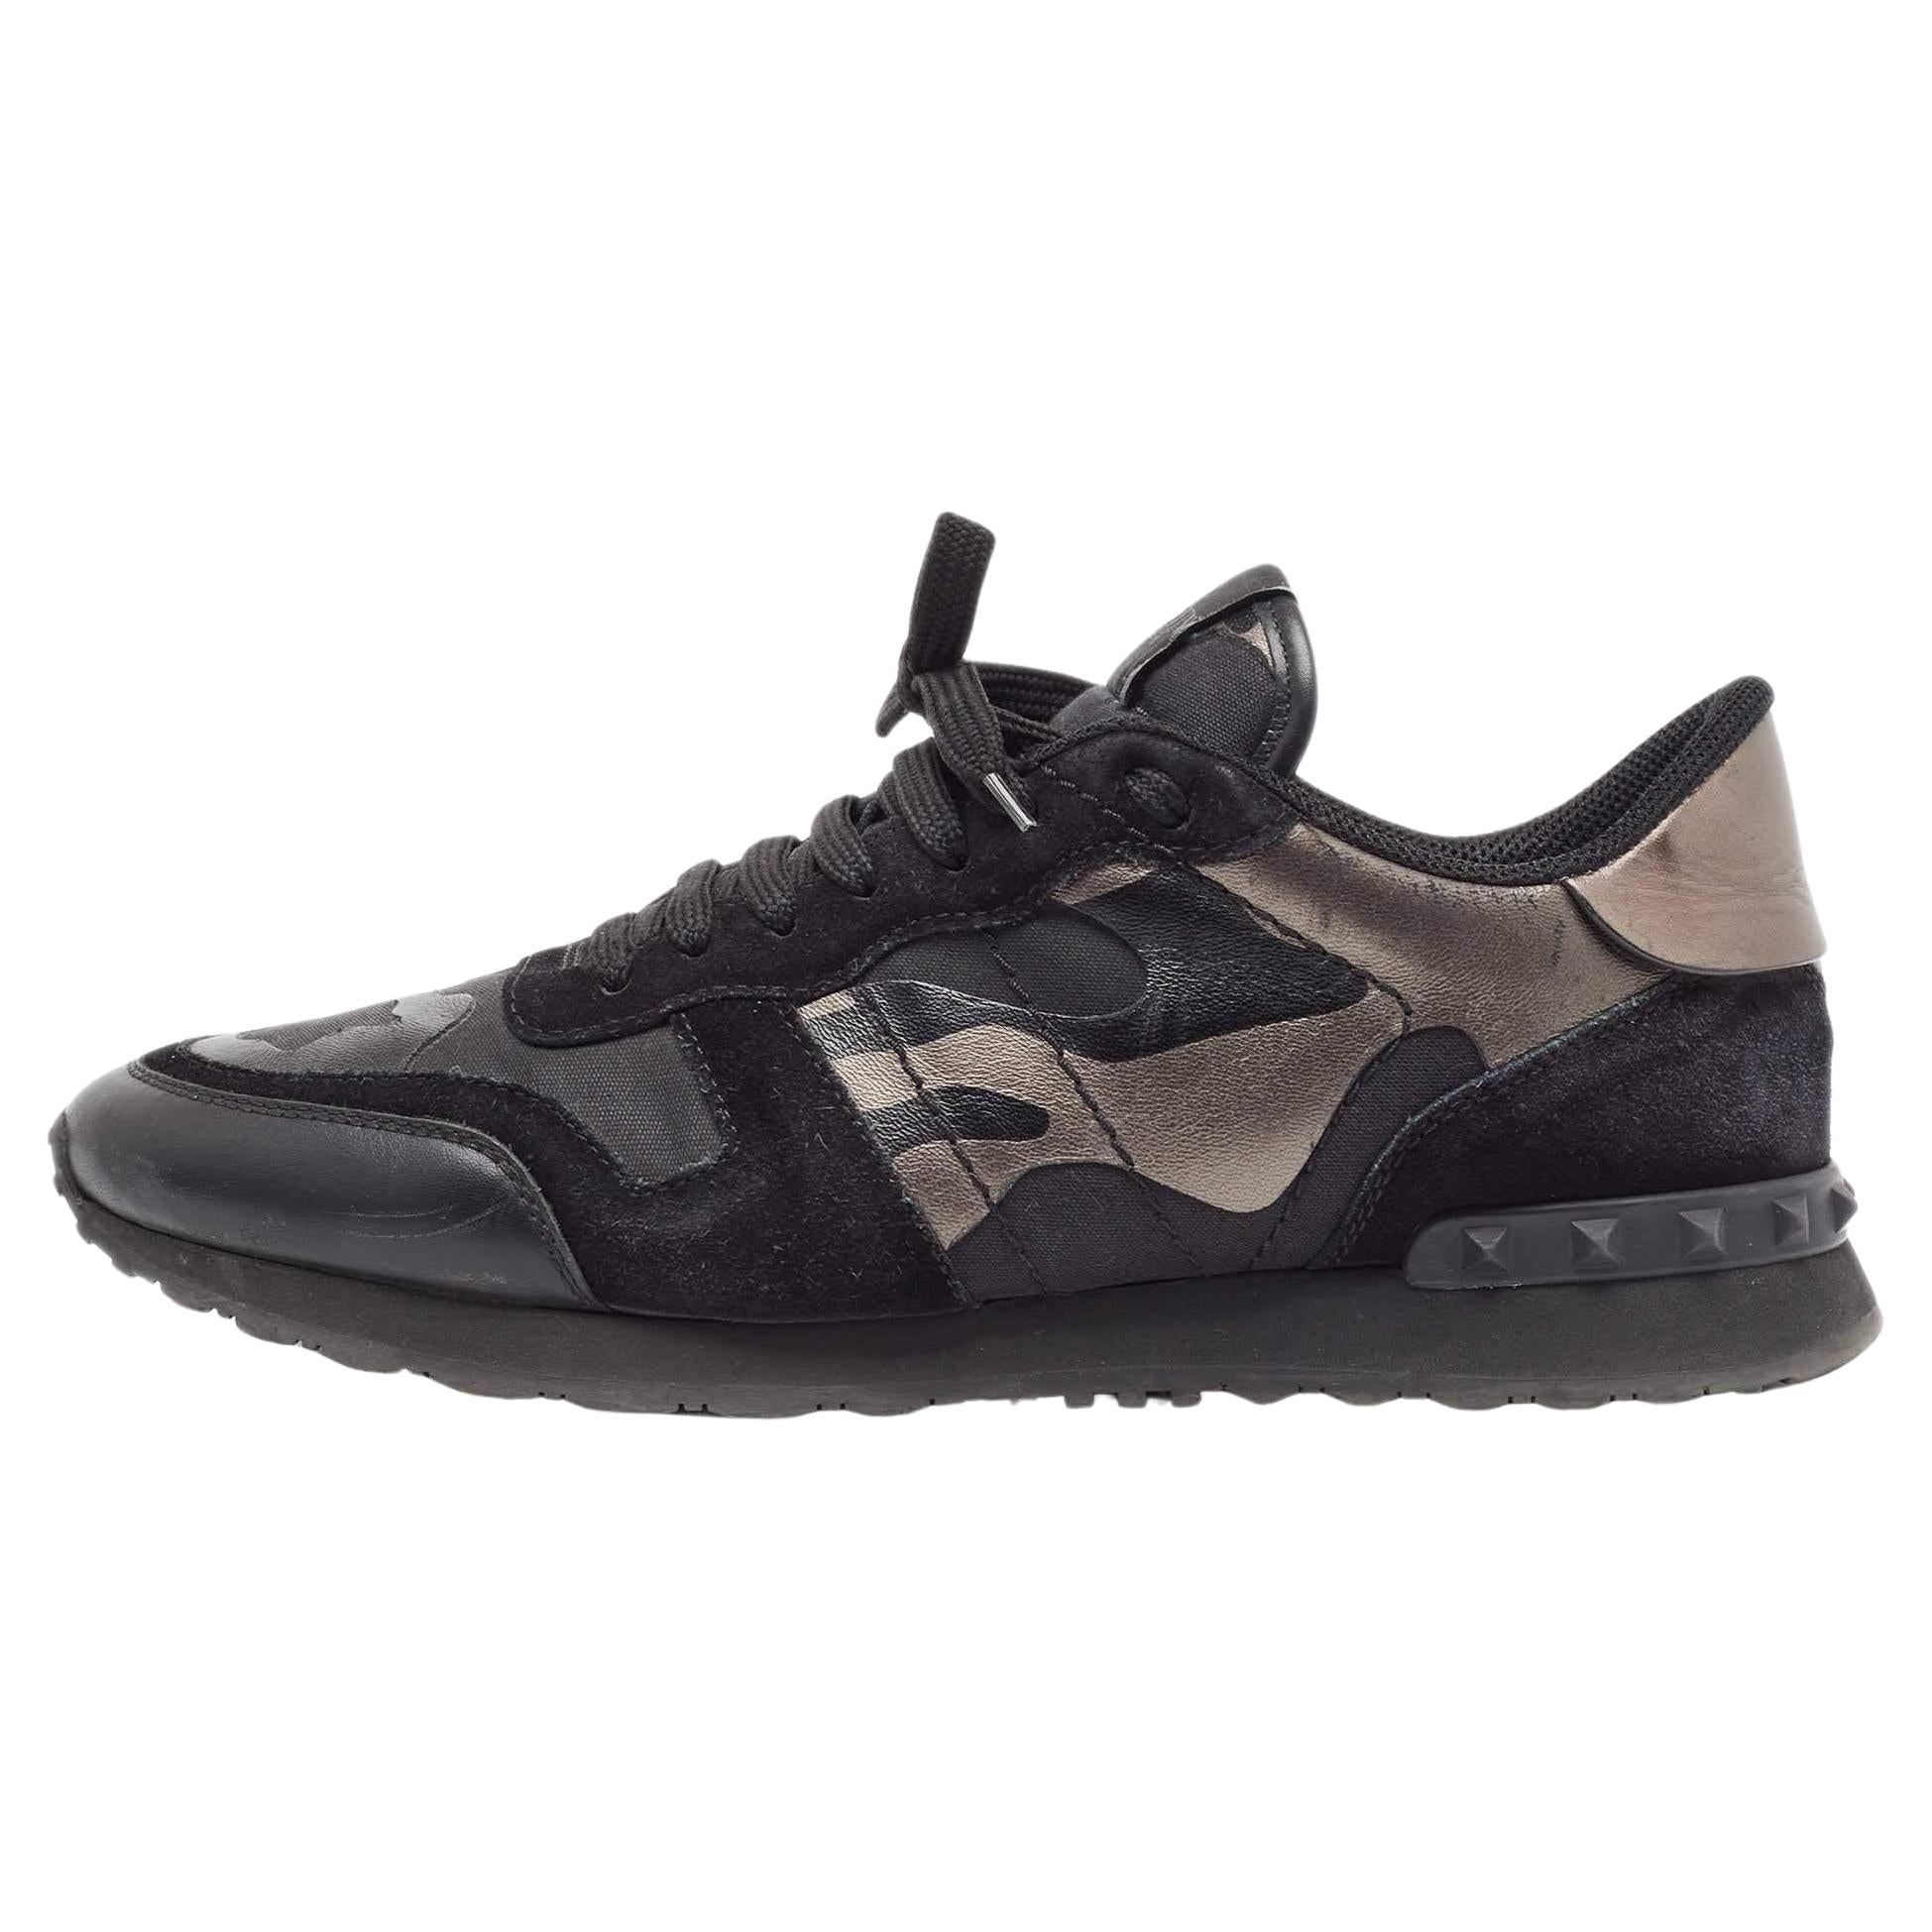 Valentino Black/Metallic Leather and Suede Rockrunner Sneakers Size 43 For Sale